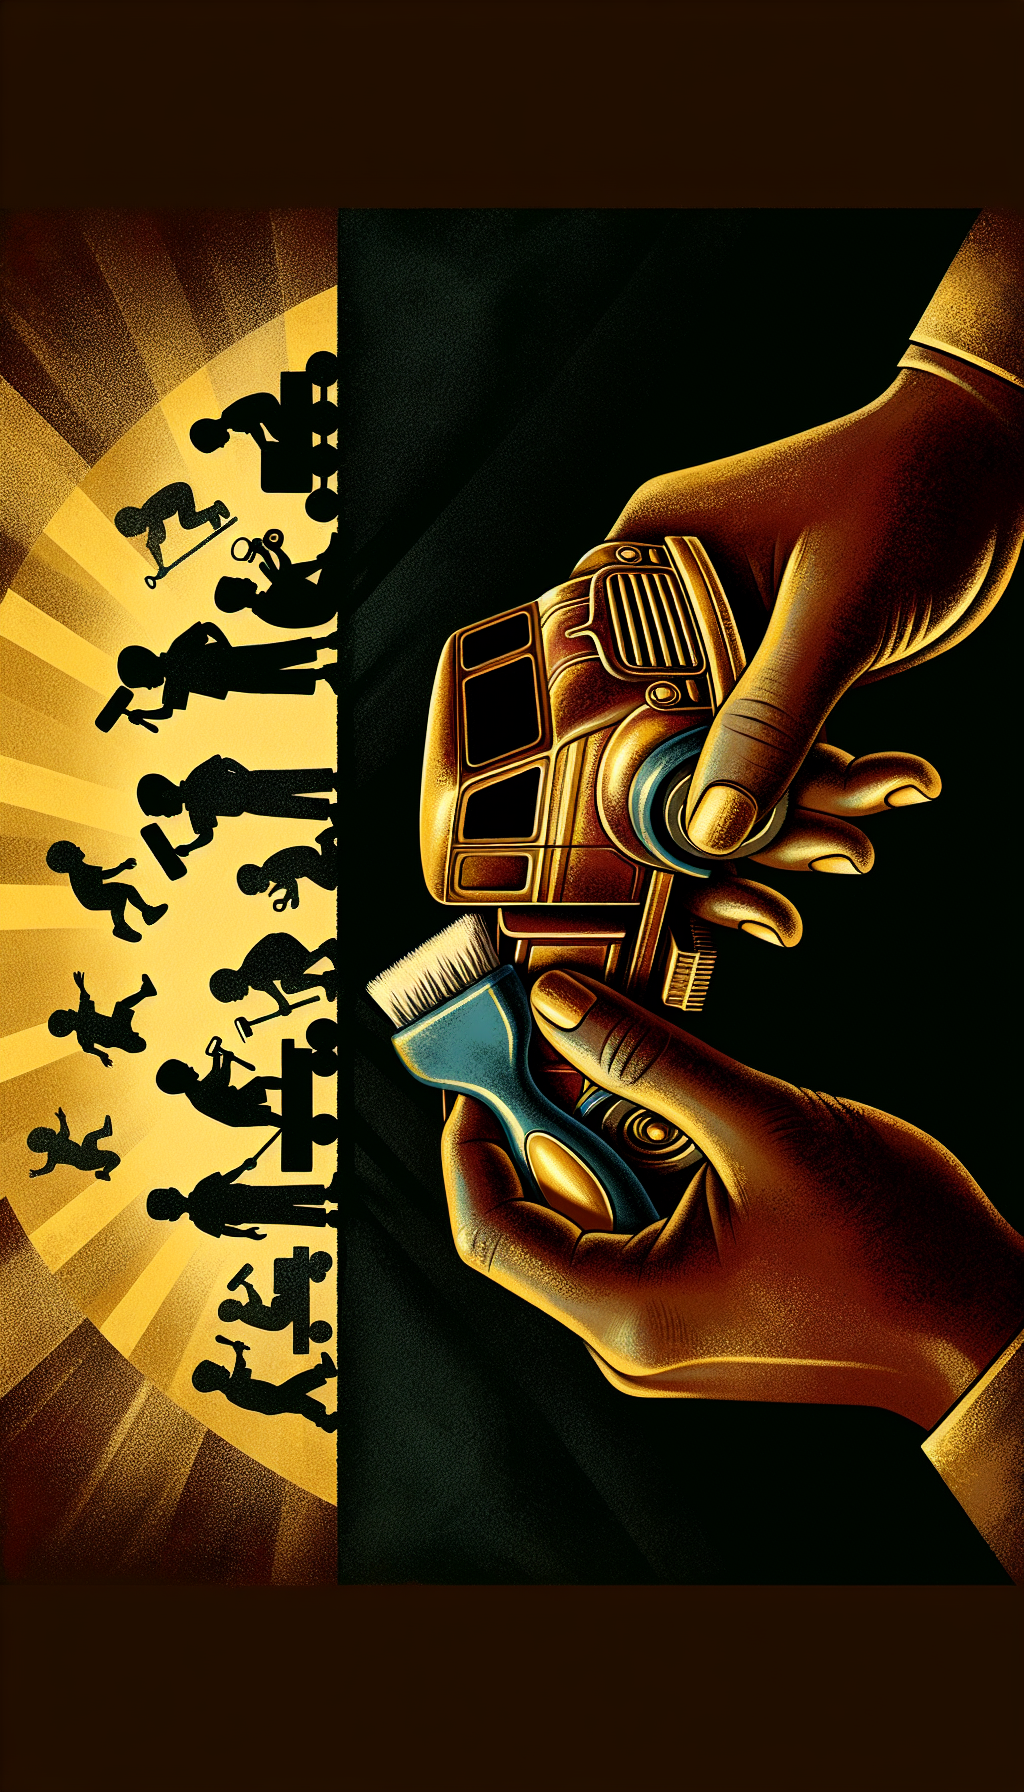 An illustration showcasing a vintage, slightly rusted Tonka truck being lovingly polished by a pair of hands. In the background, silhouettes of children playing with pristine versions of the same truck cast against the shimmering golden glint of a price tag, symbolizing the hidden value in restoring these cherished playtime legends.